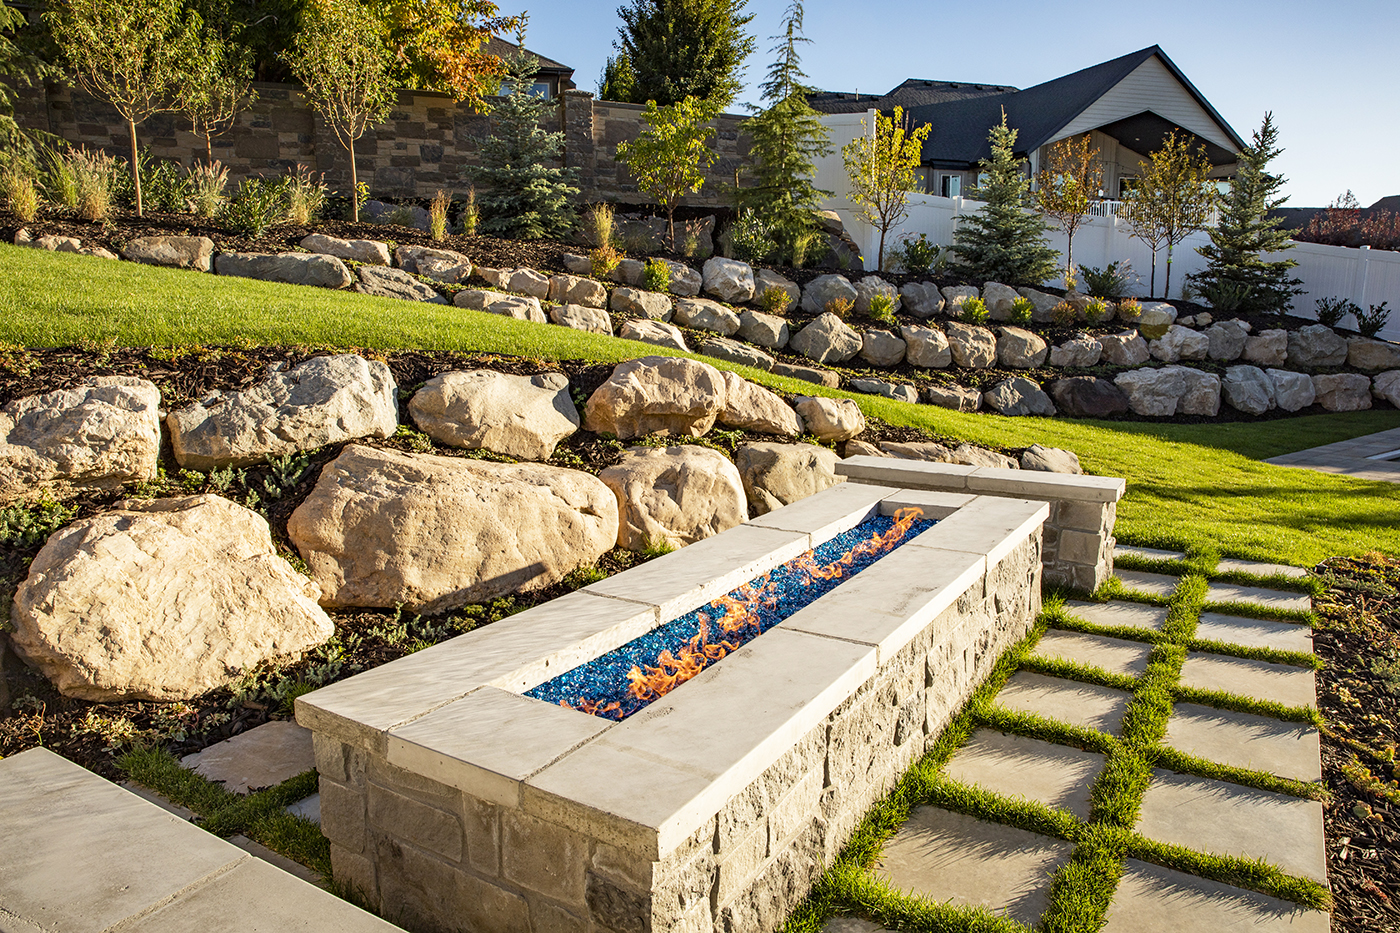 Stunning design and quality installation of your rock wall from Big Rock Landscaping will make your backyard your personal oasis without the pain of doing it yourself.